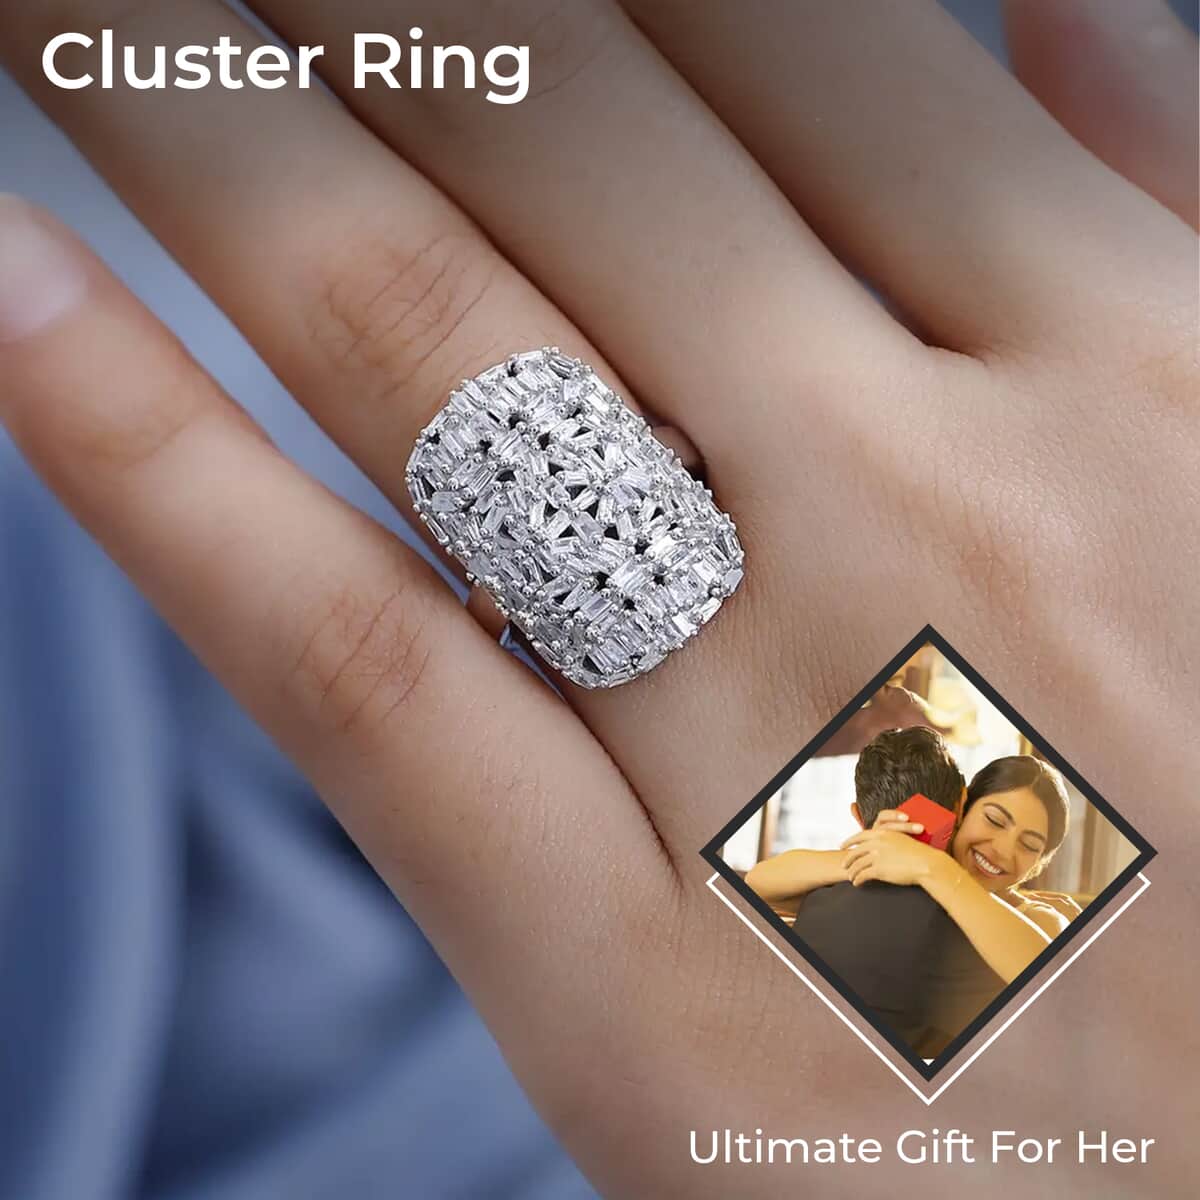 Diamond Cluster Ring, Diamond Ring, Cluster Cocktail Ring, Platinum Over Sterling Silver Ring,  Diamond Jewelry For Her 1.00 ctw (Size 6.0) image number 2